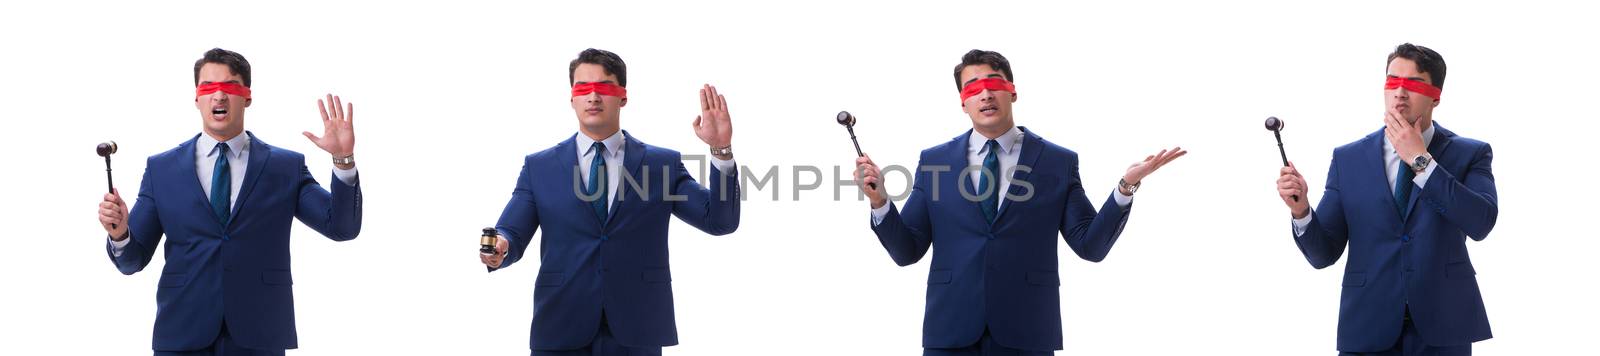 Lawyer with blindfold holding a gavel isolated on white by Elnur